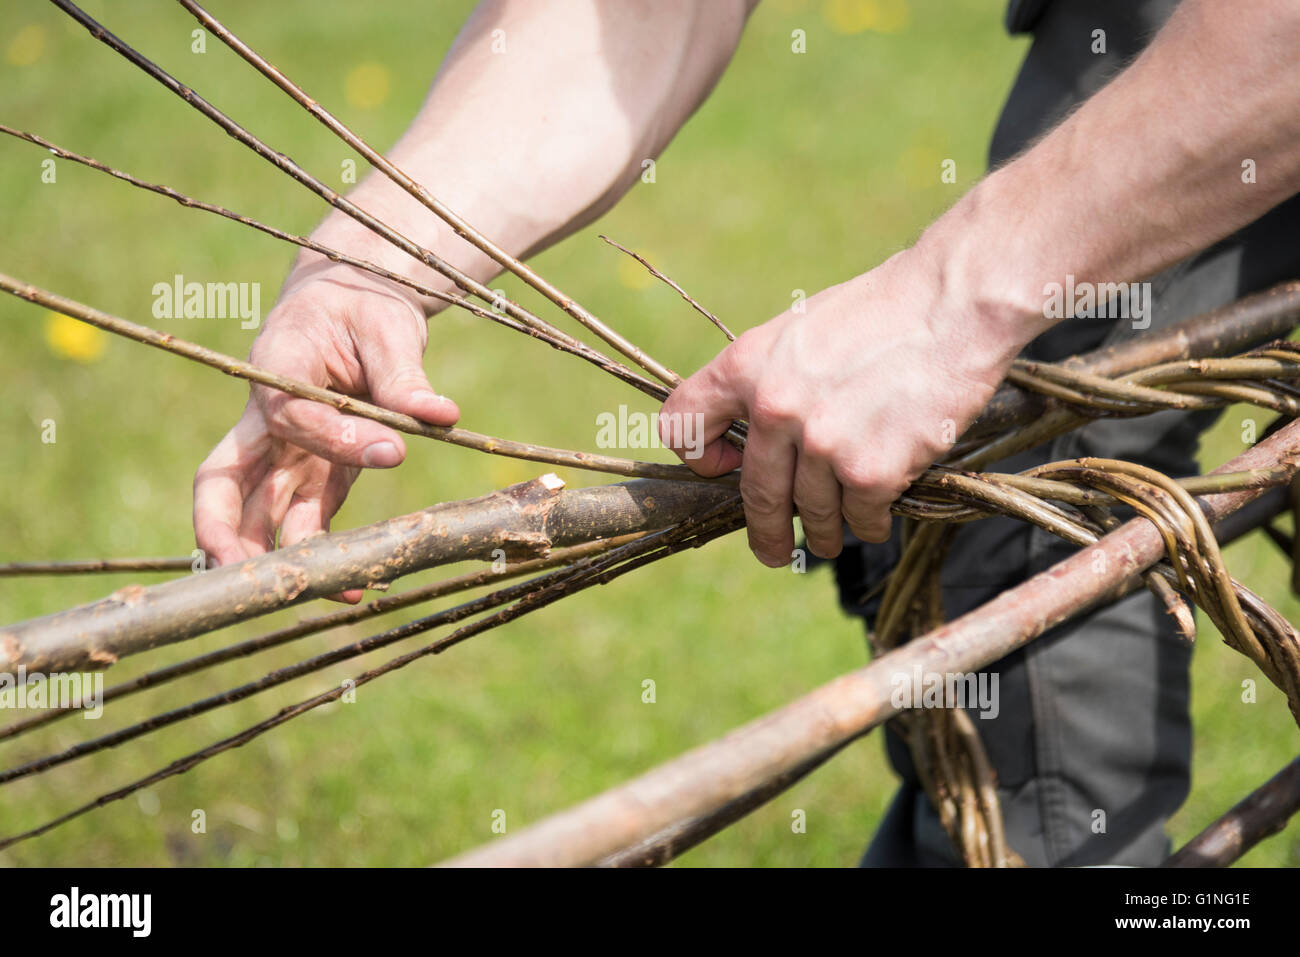 A man making willow plant supports at a craft fair in the UK Stock Photo